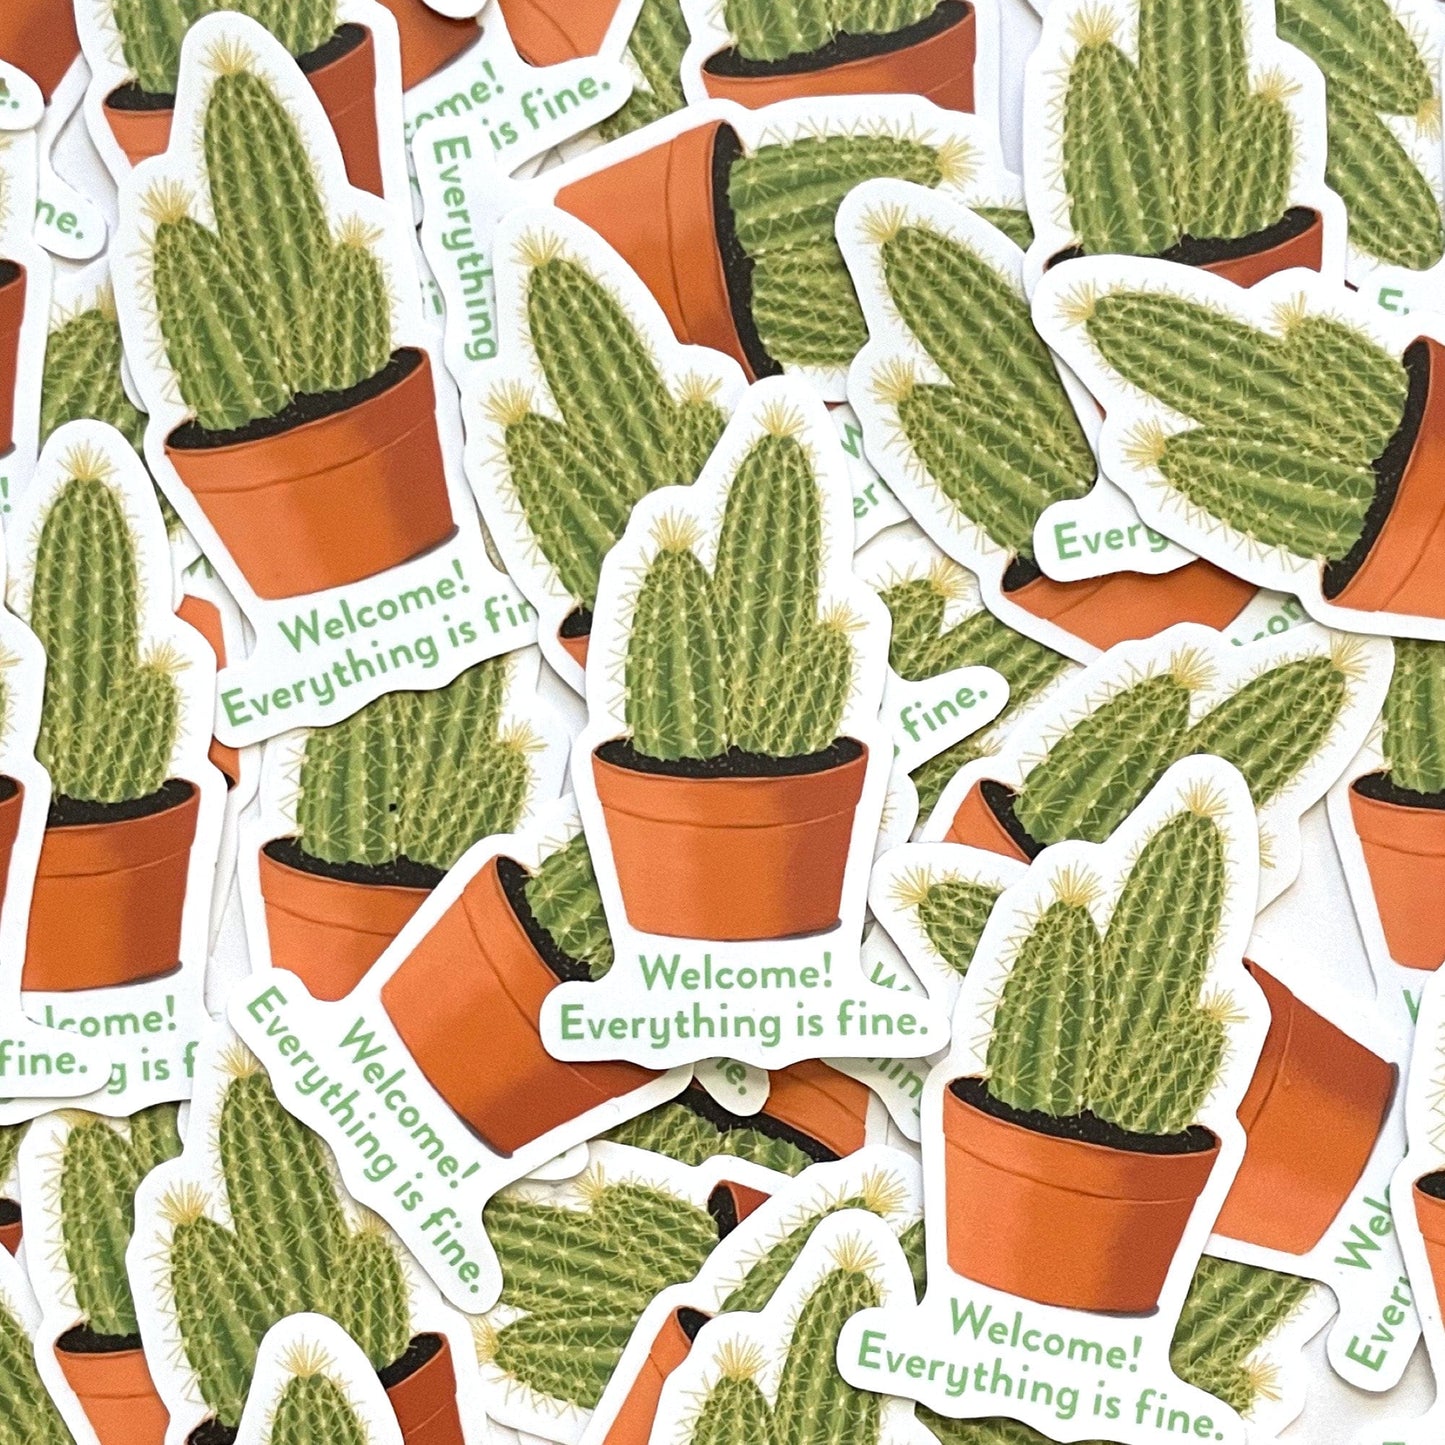 Everything is Fine Cactus Sticker Waterproof - Inspired by The Good Place